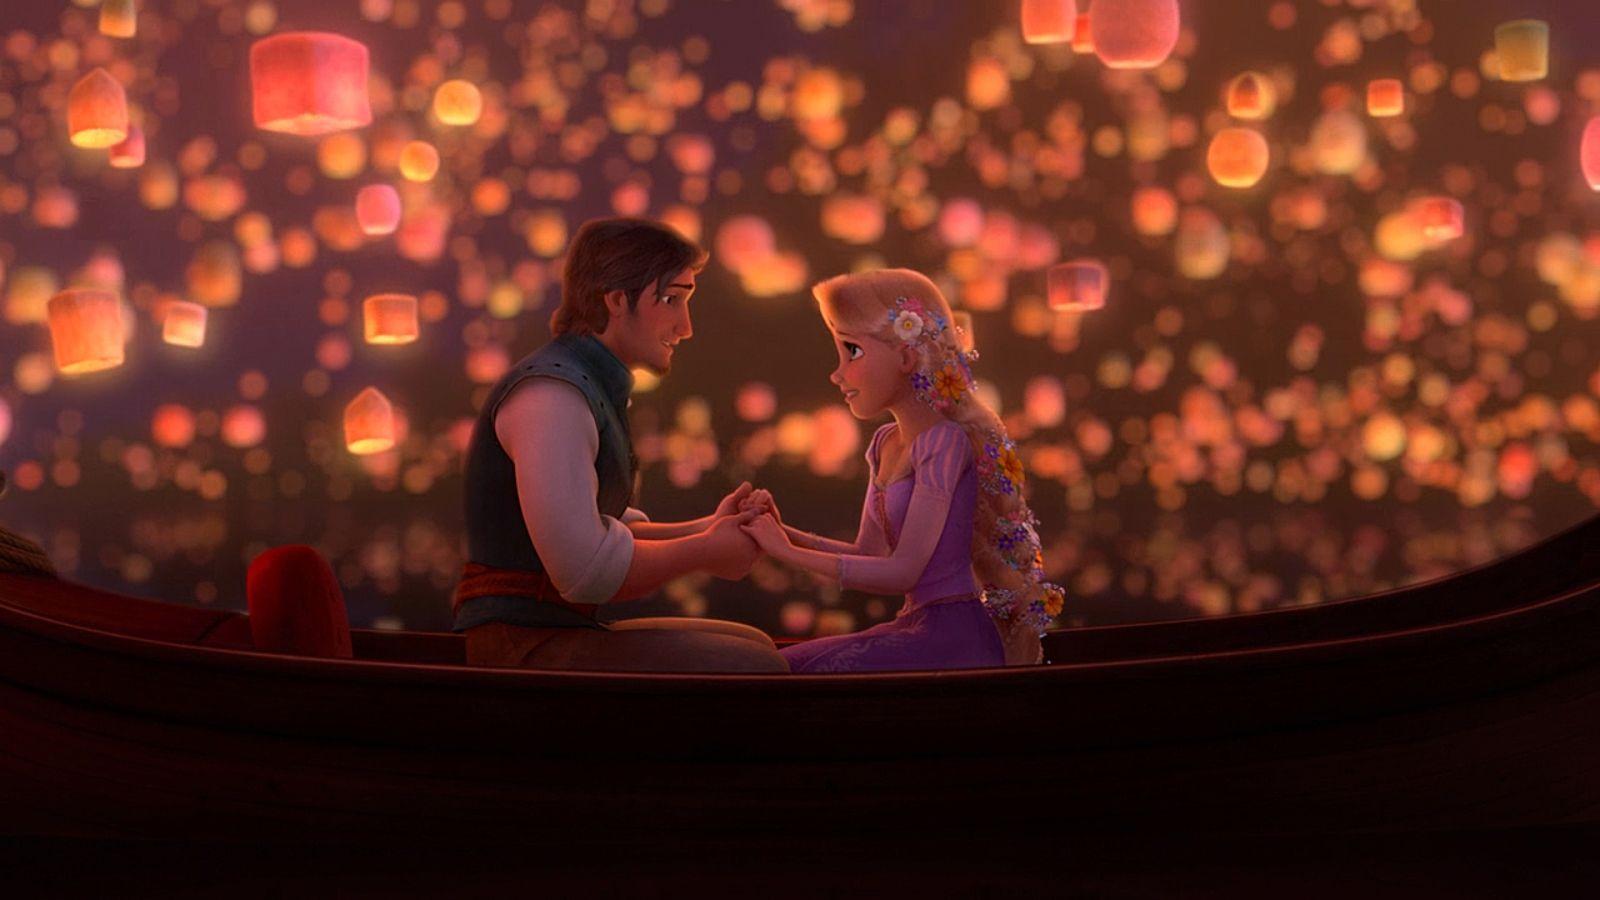 Tangled Wallpaper, Tangled Background for PC Widescreen